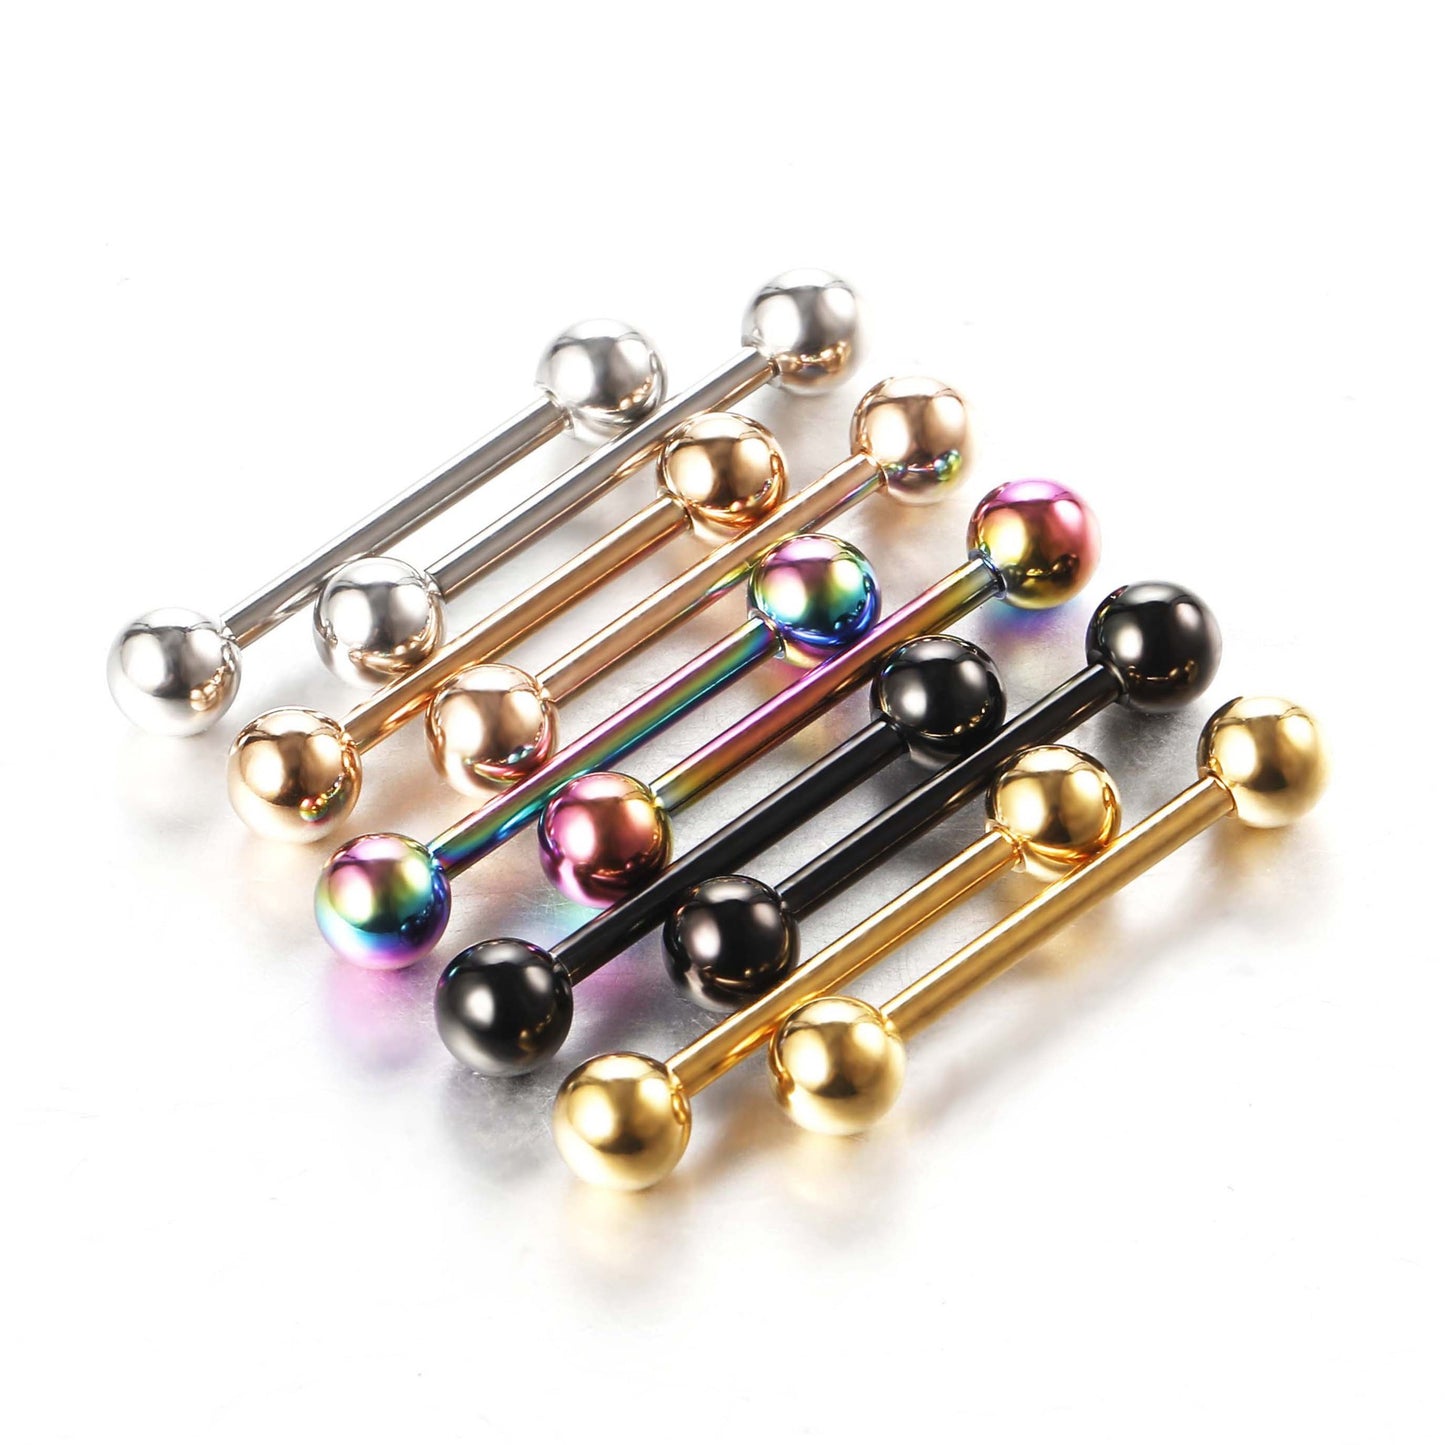 Fashion Solid Color Stainless Steel Plating Tongue Nail 1 Piece